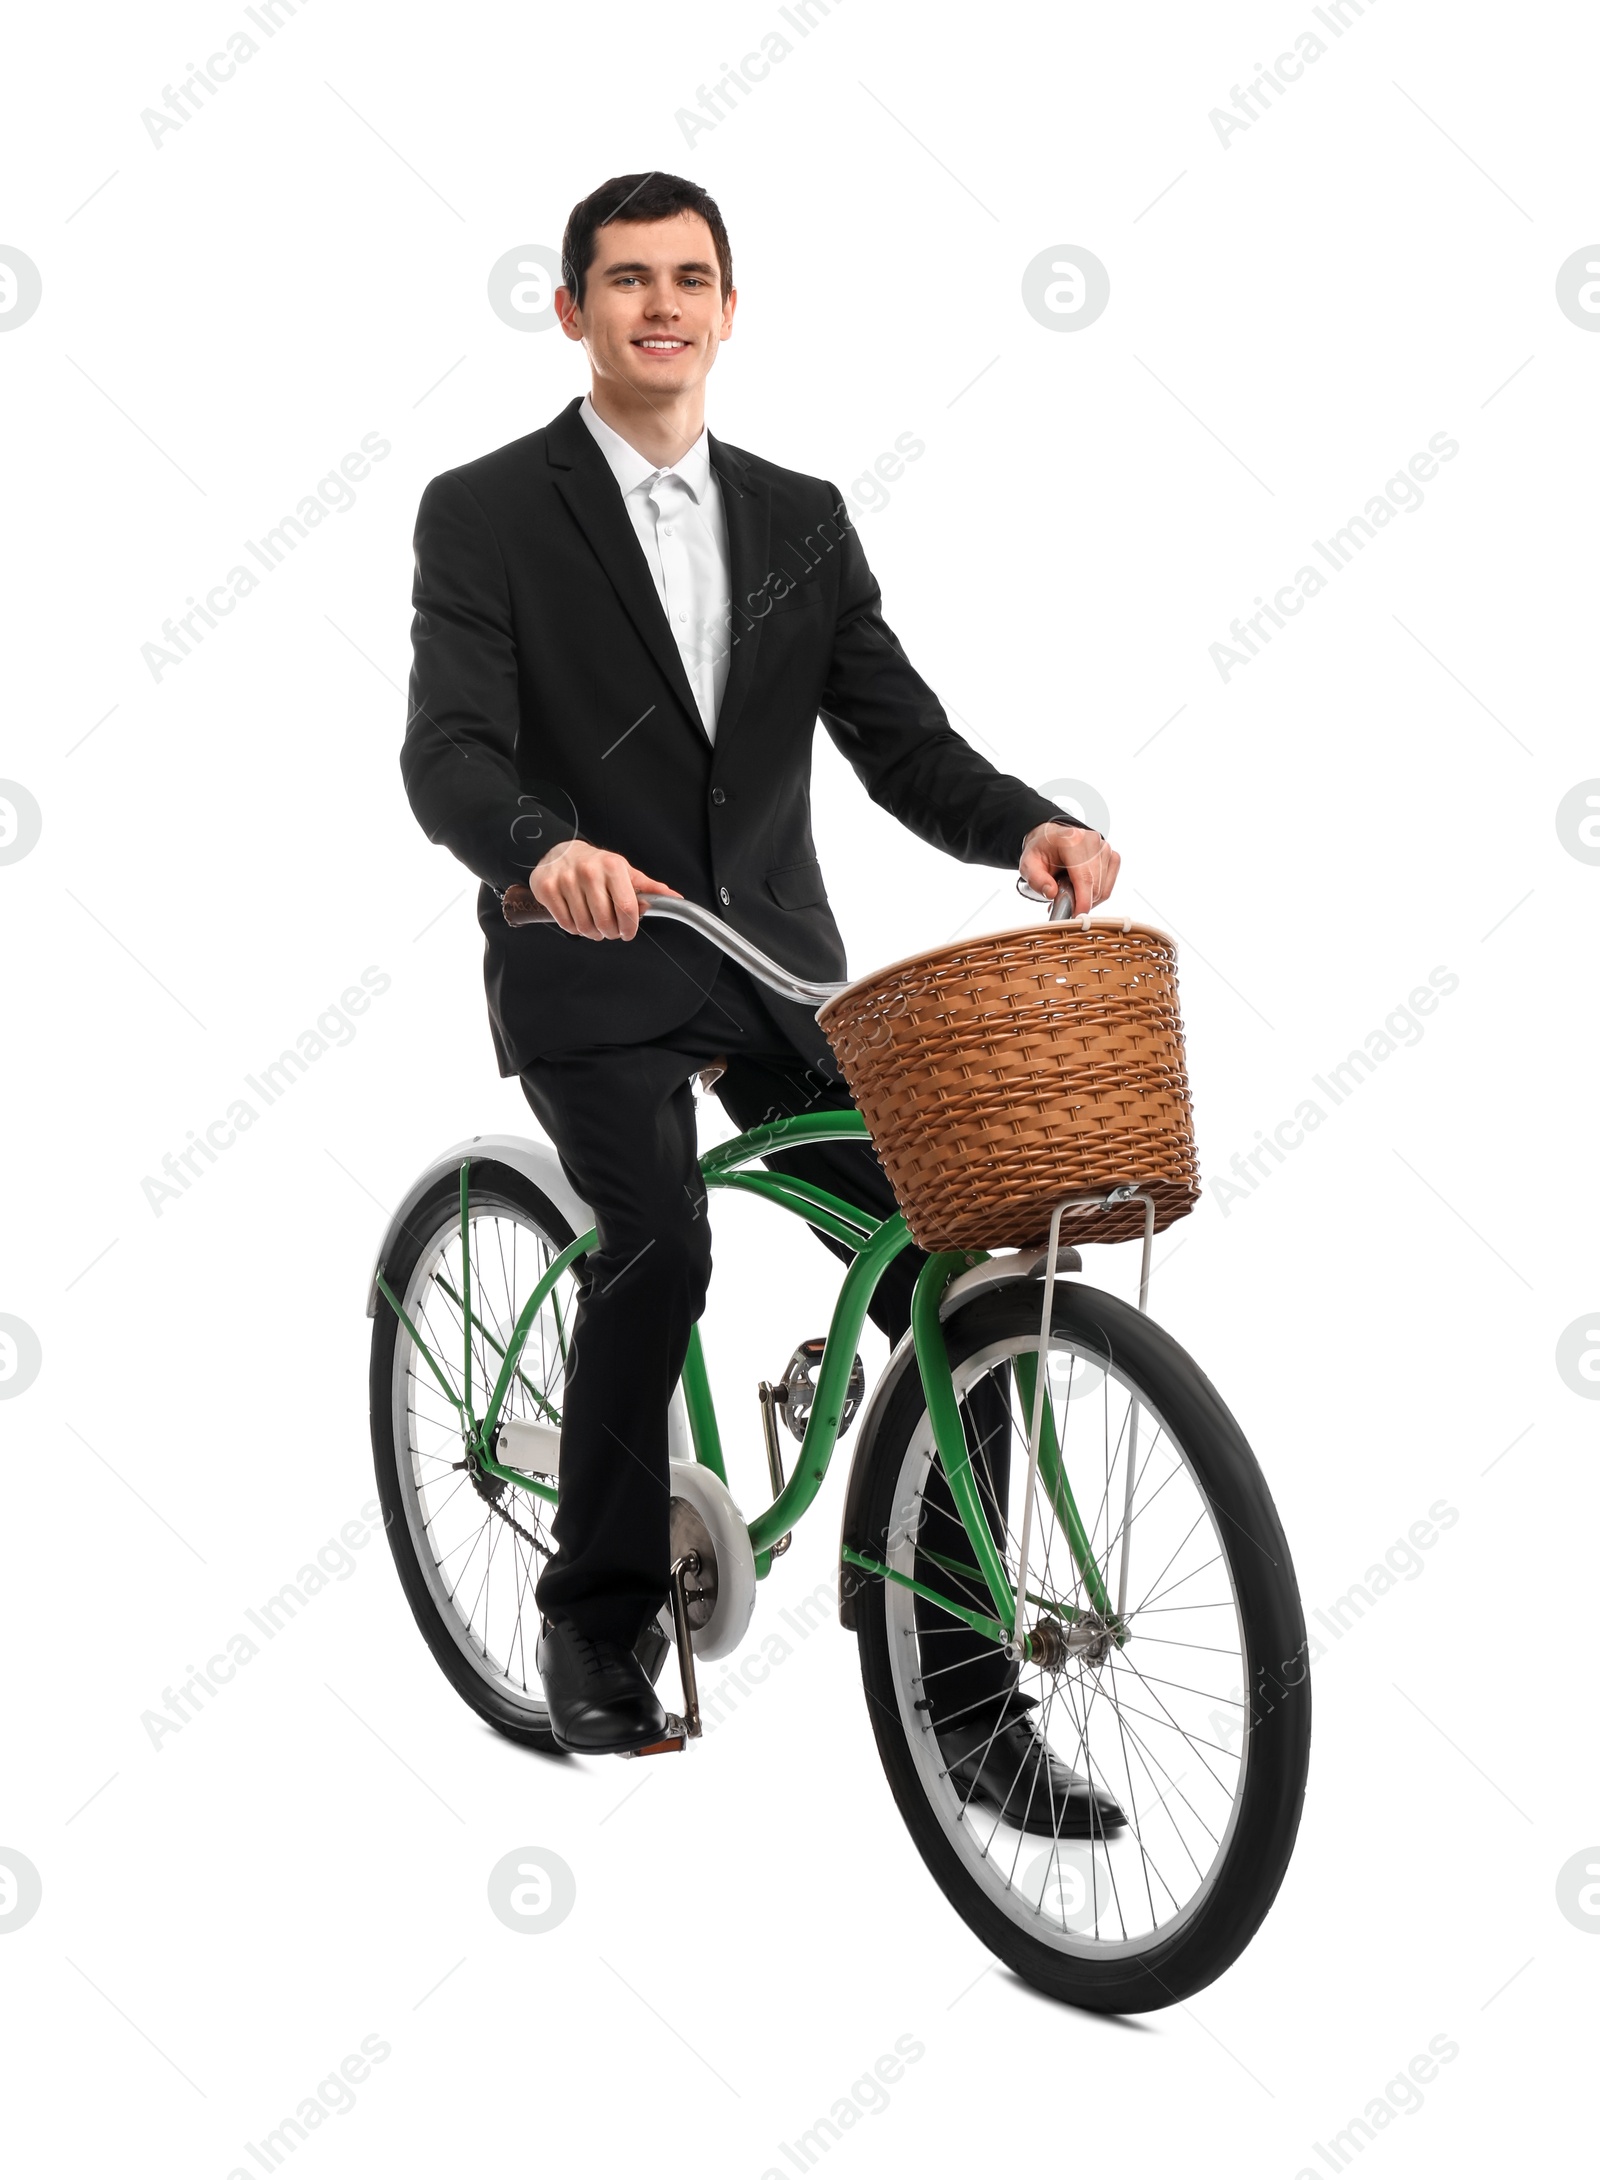 Photo of Smiling man riding bicycle with basket on white background